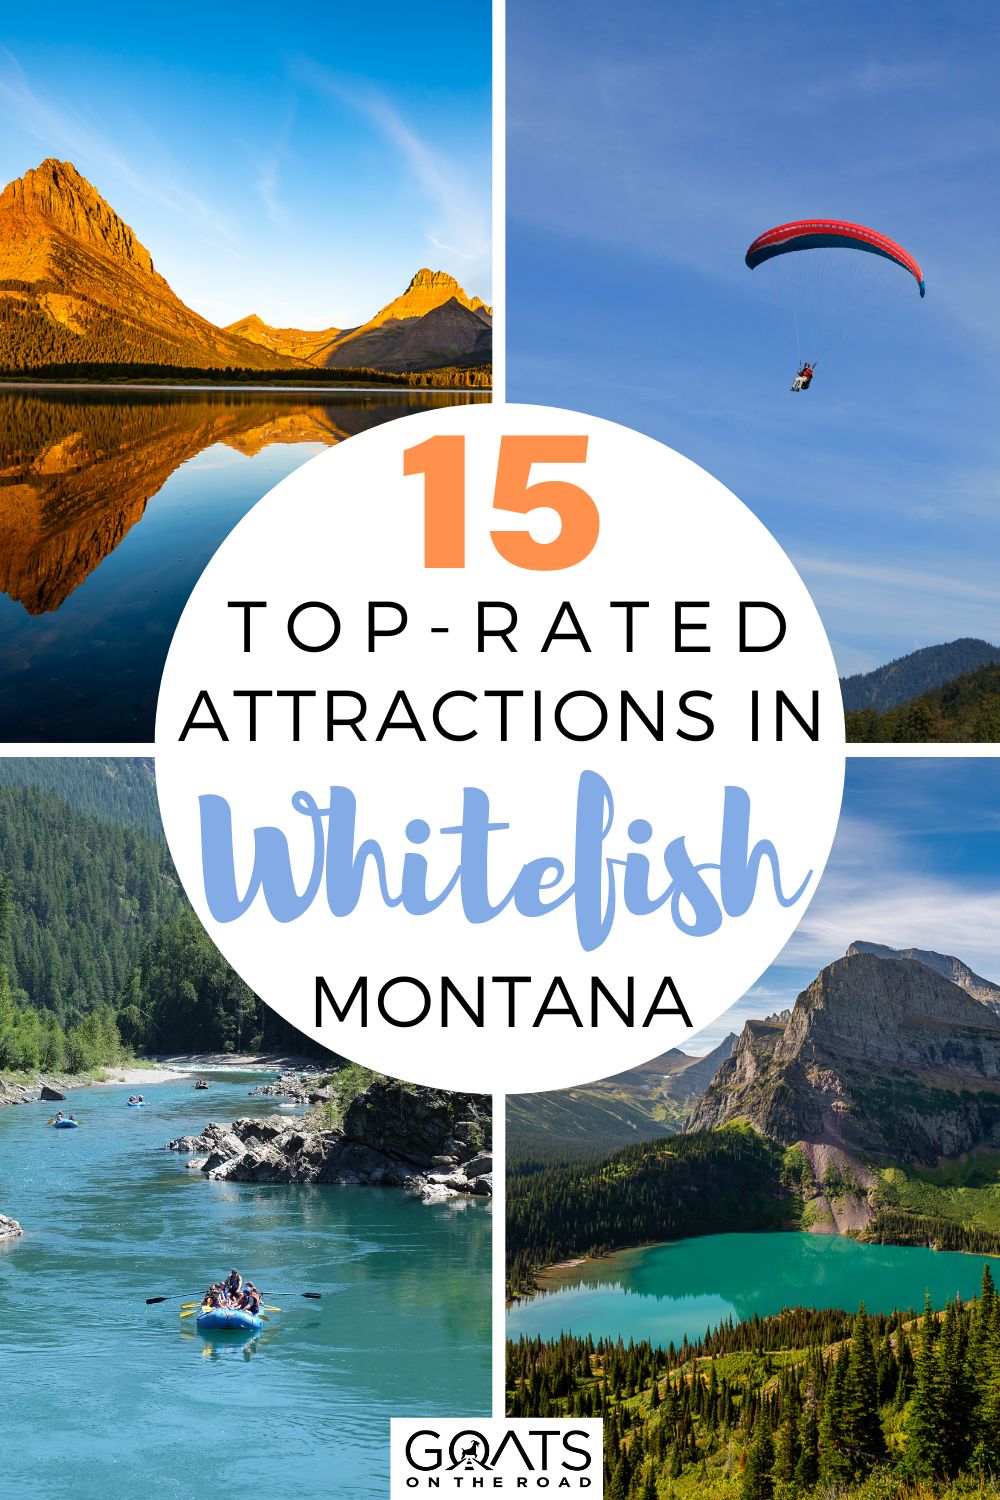 15 Top-Rated Attractions in Whitefish, MT